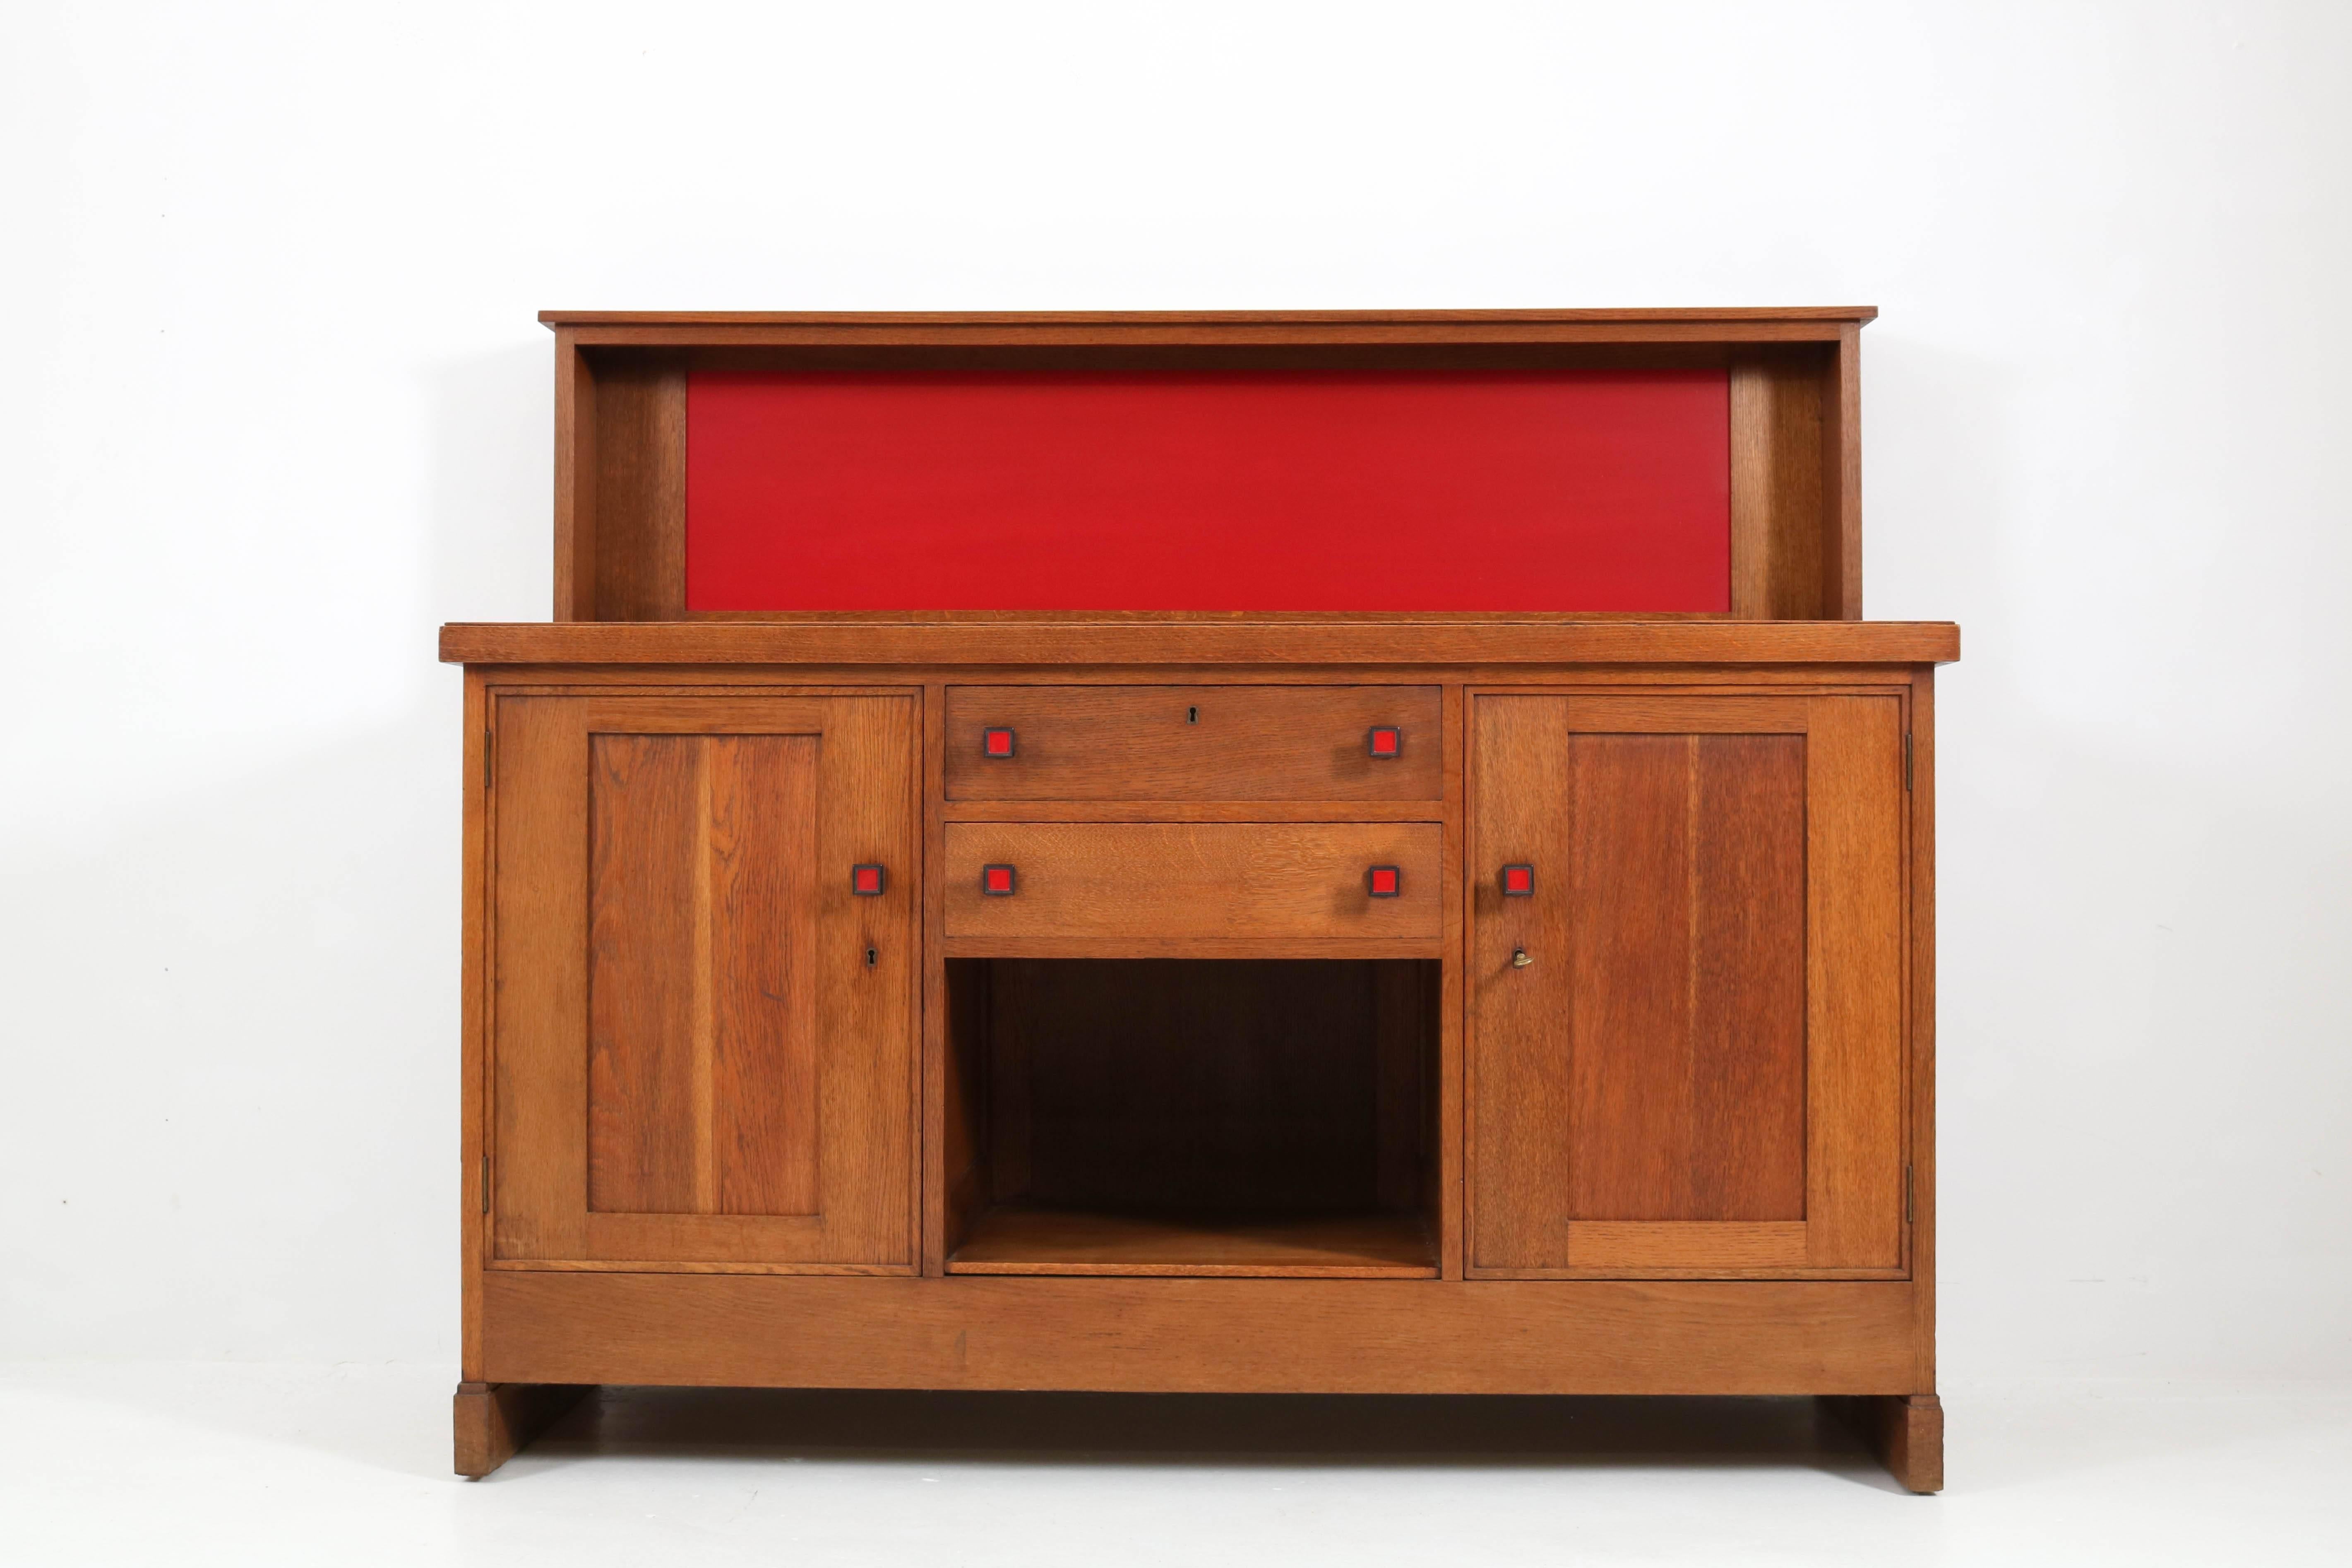 Stunning Dutch Art Deco Haagse School sideboard by Henk Wouda for Pander.
Solid oak with red lacquered details.
Original solid Macassar ebony knobs.
Striking Dutch design from the 1920s.
Marked with metal tag and brand mark and original key.
In